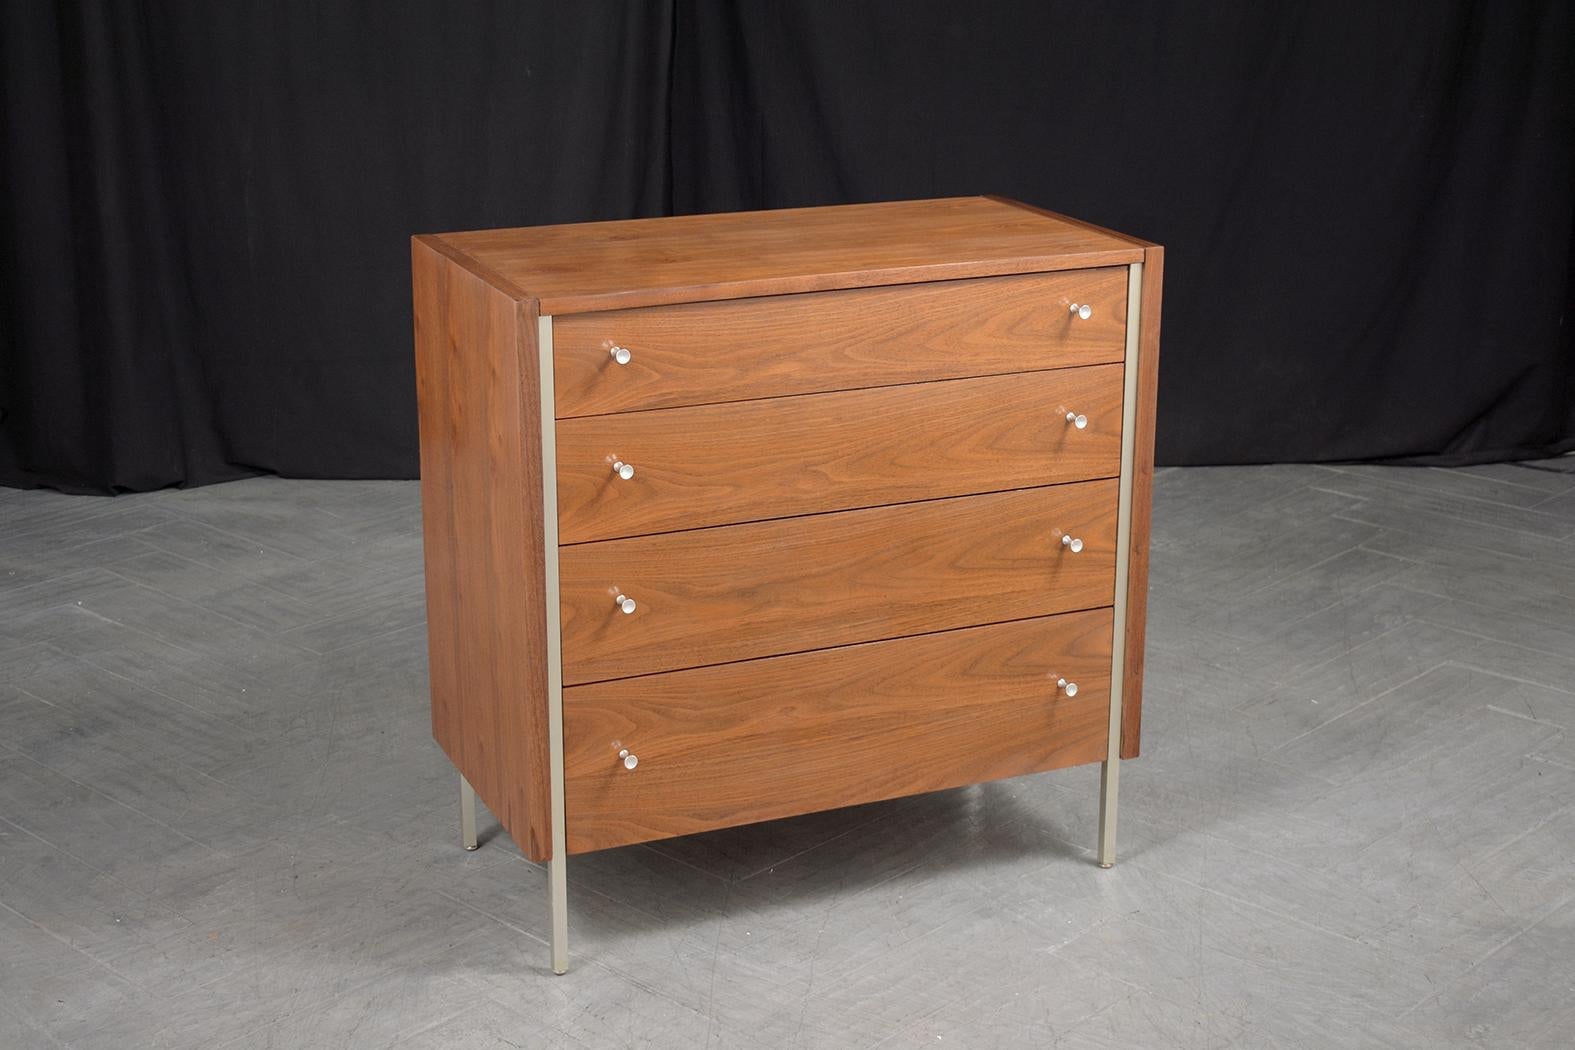 Lacquer Vintage 1960s Handcrafted Mid-Century Modern Walnut Chest of Drawers